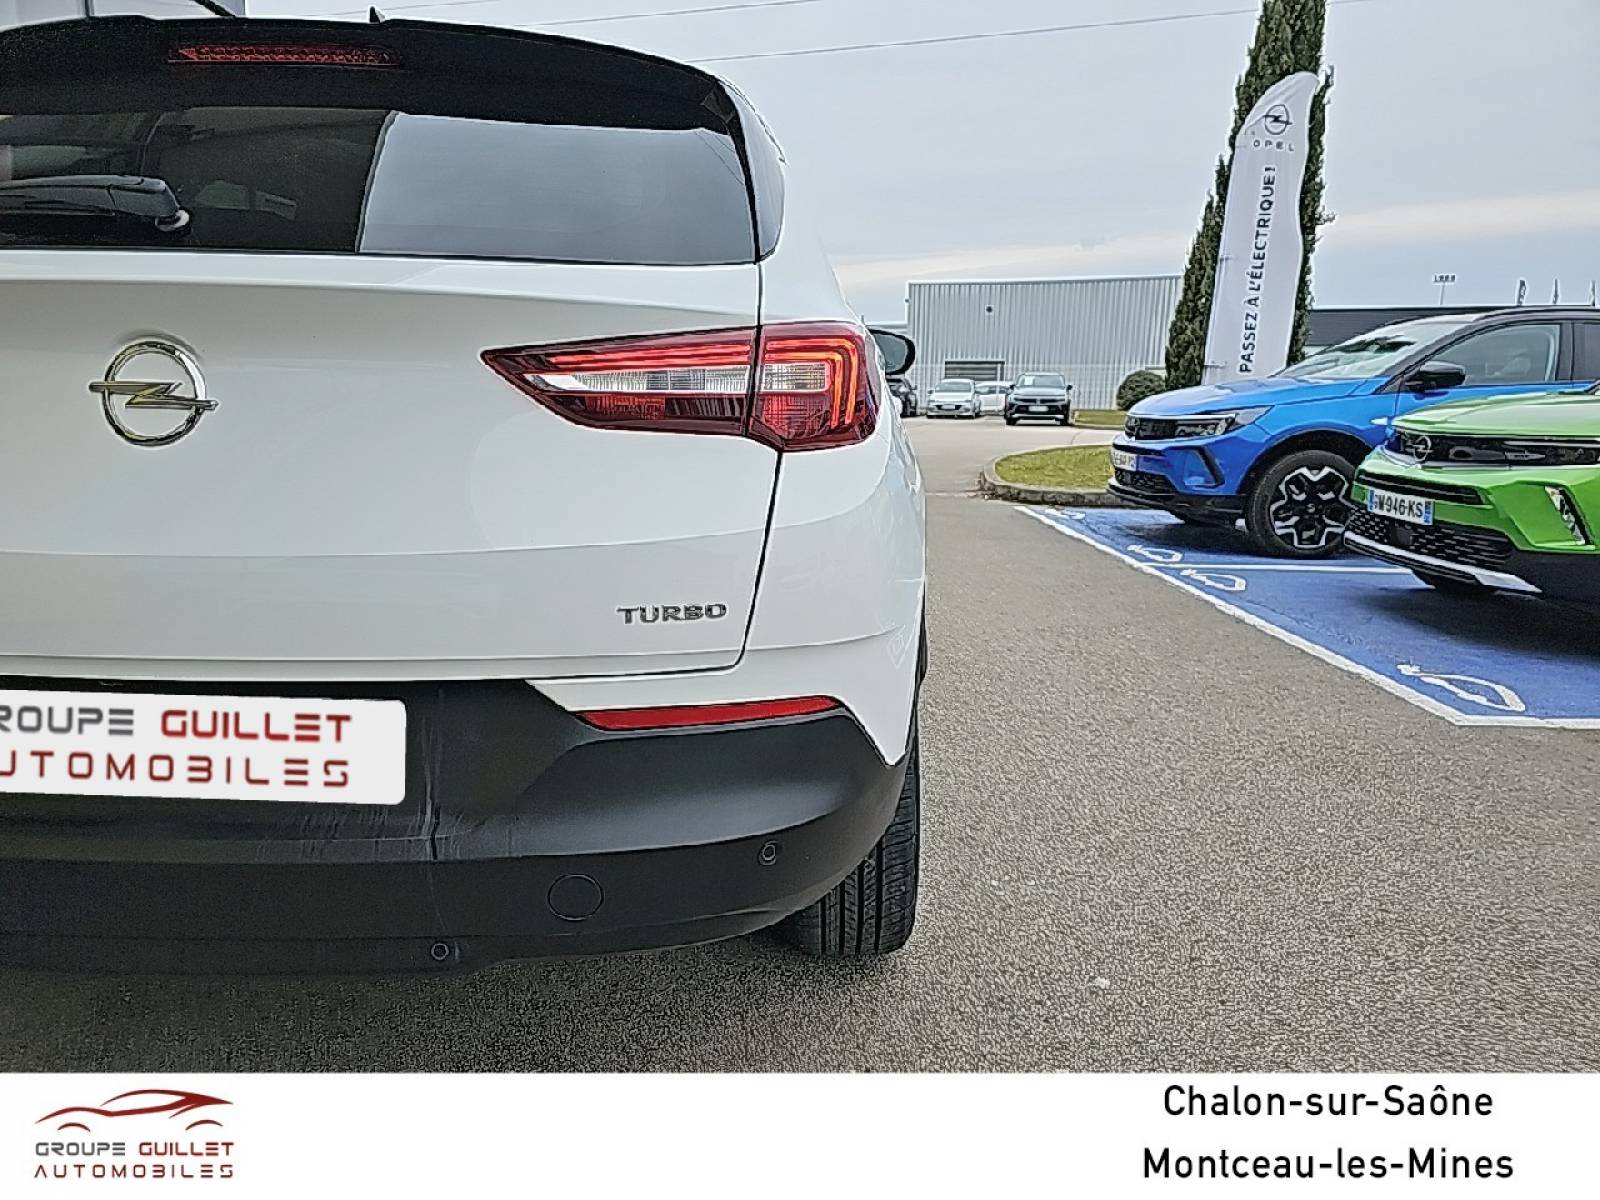 OPEL Grandland X 1.2 Turbo 130 ch - véhicule d'occasion - Groupe Guillet - Opel Magicauto Chalon - 71380 - Saint-Marcel - 47